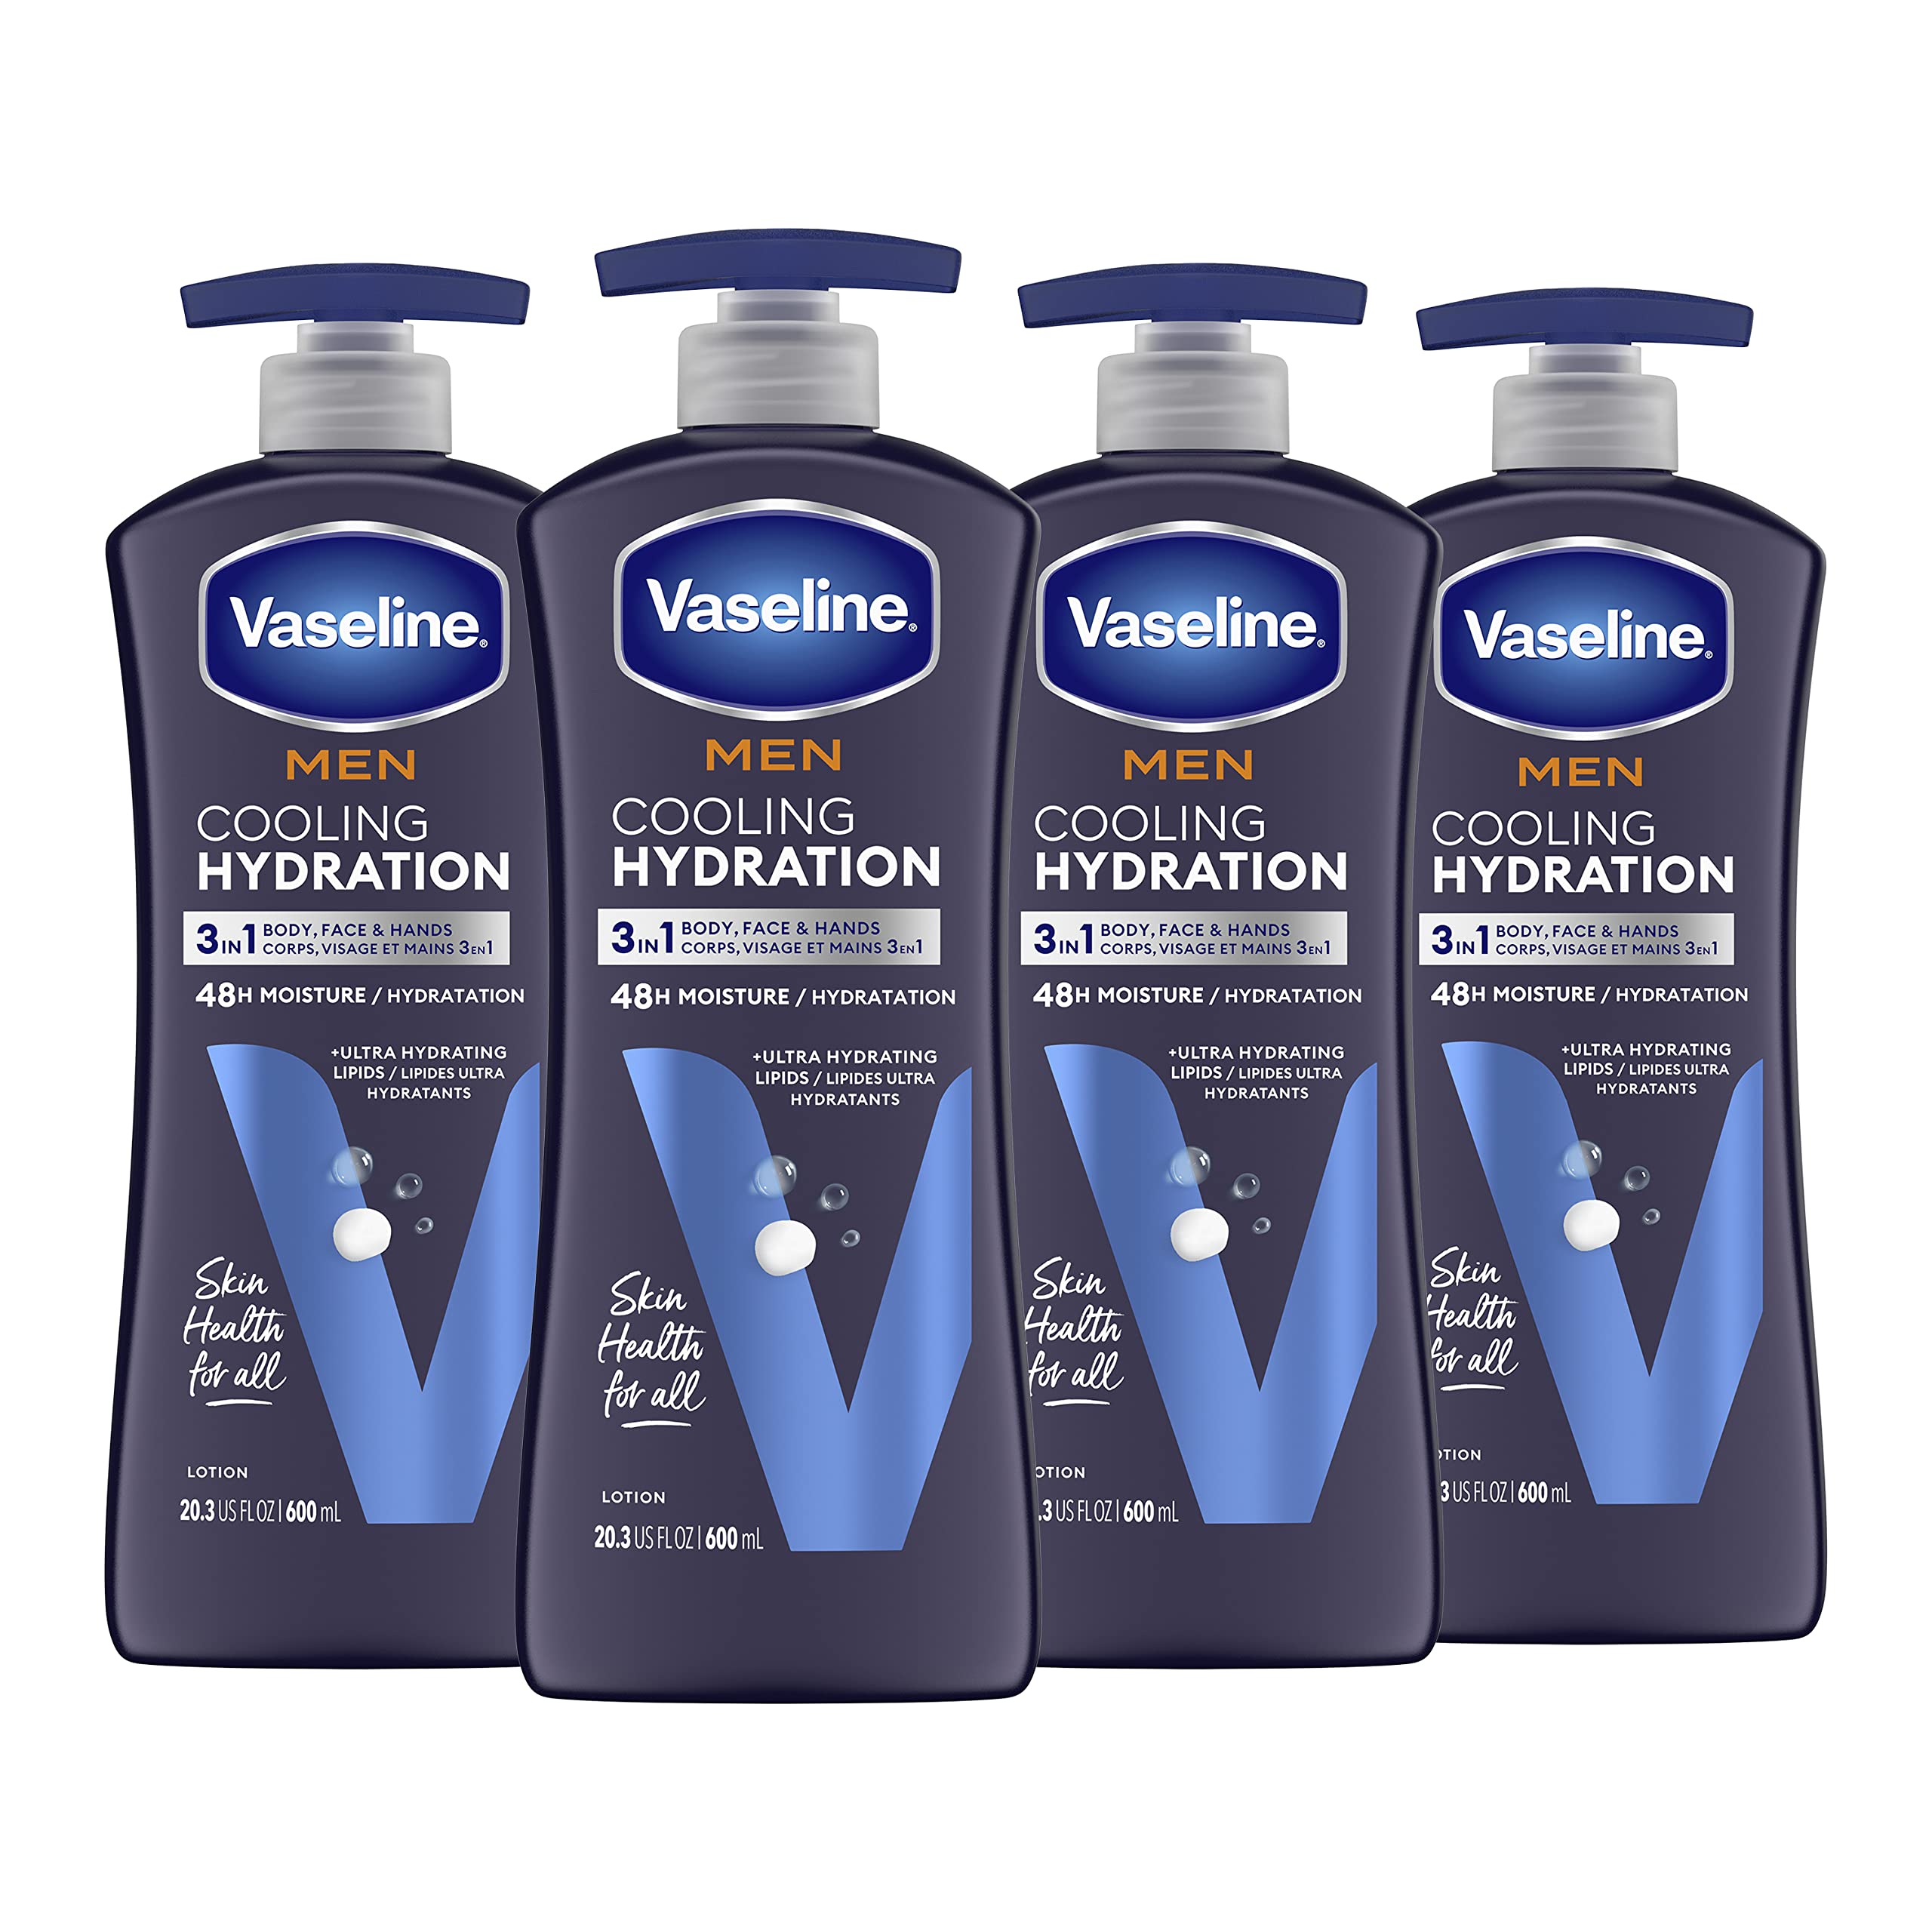 Vaseline Men Cooling Hydration 3-in-1 Face, Hands & Body Lotion for Men for Dry Skin with Menthol & Ultra-Hydrating Lipids 20.3 oz, Pack of 4